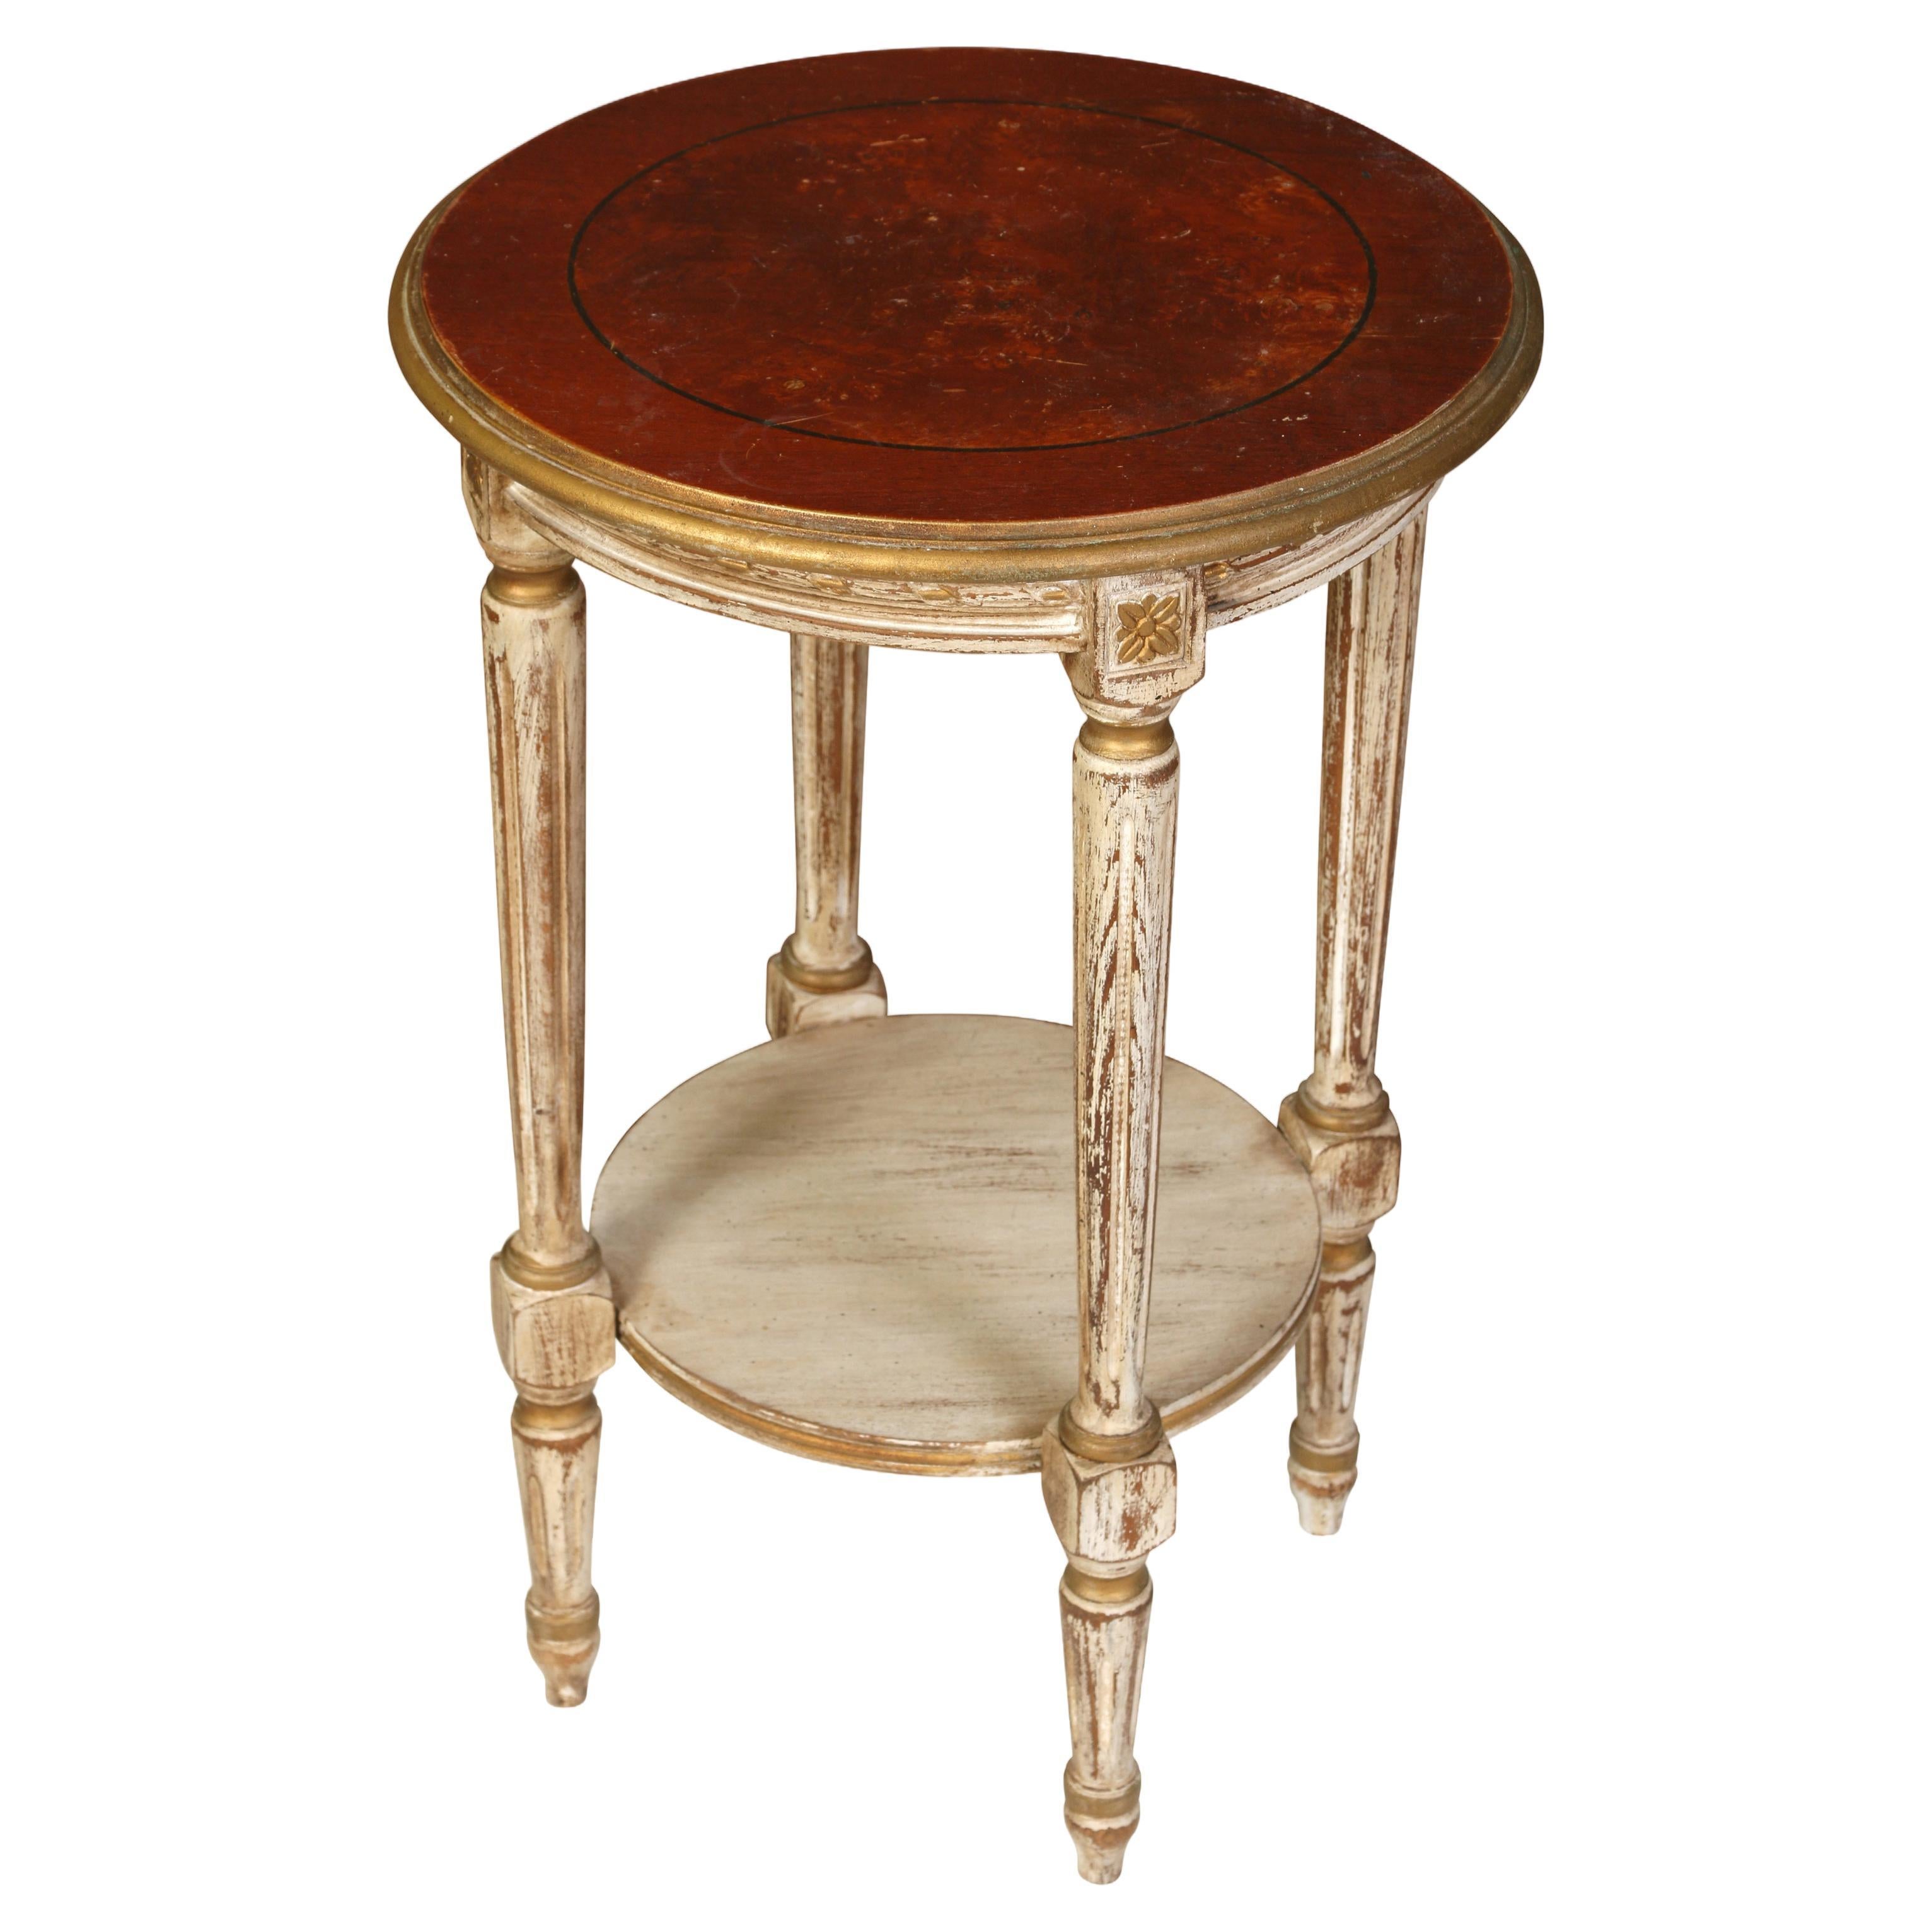 Small Round Painted Drinks table